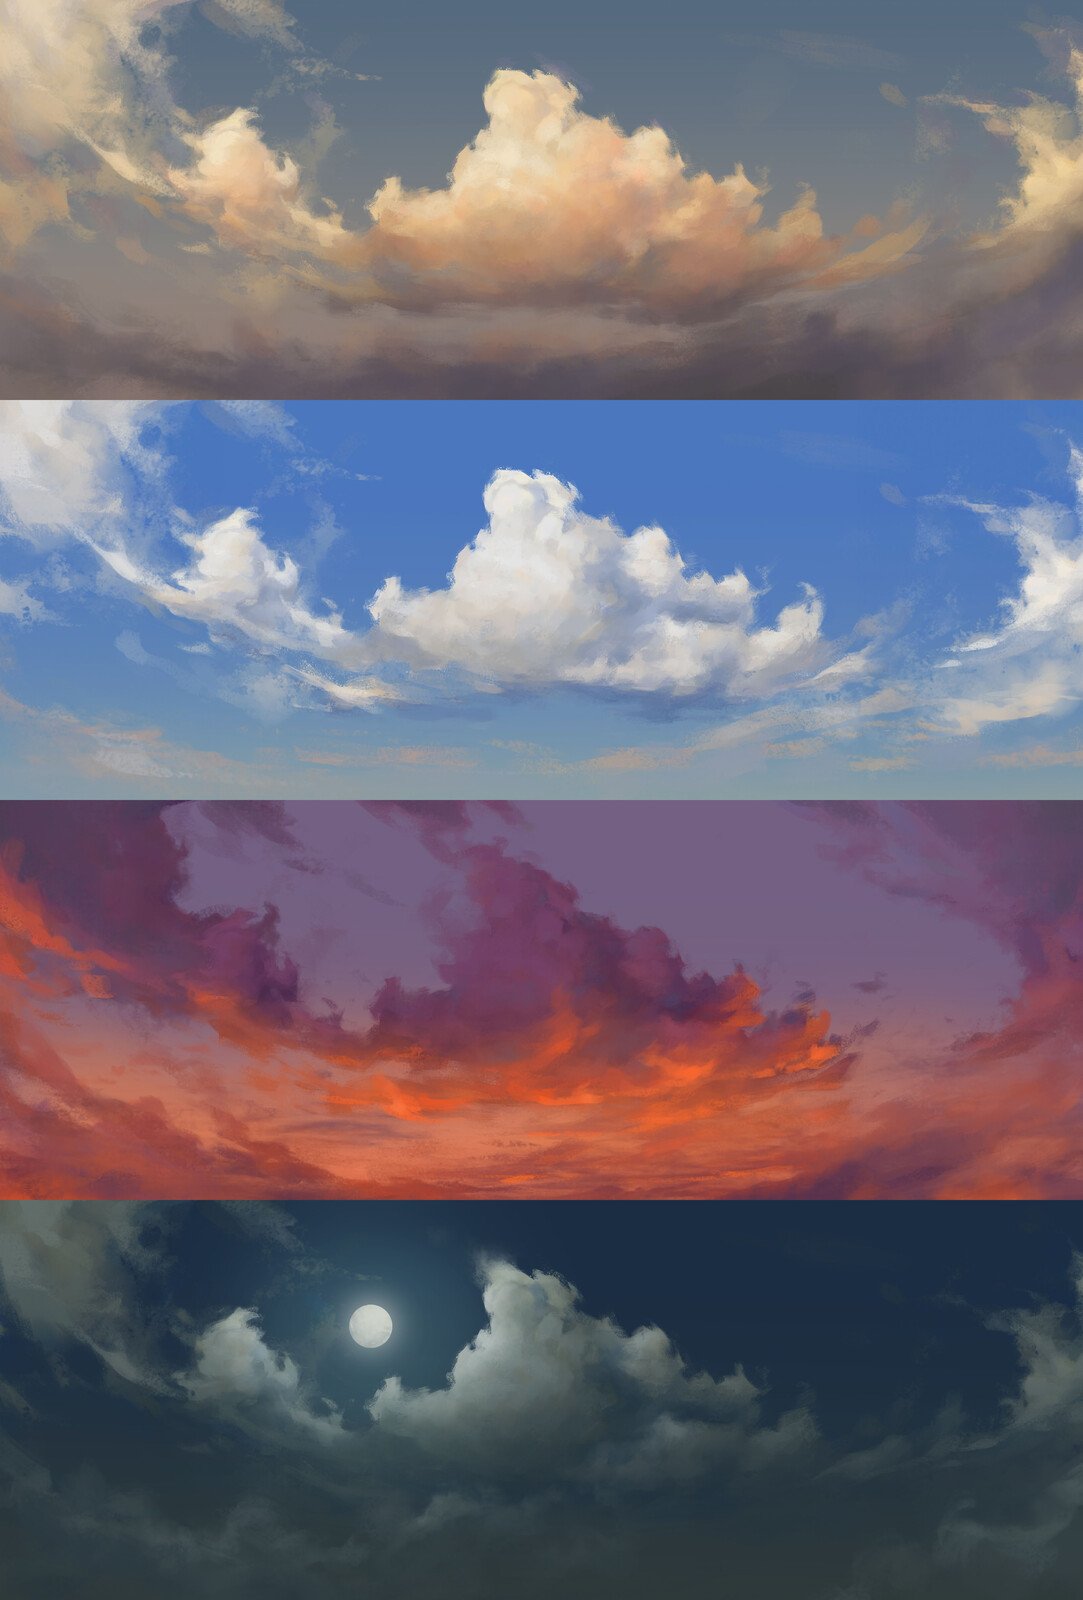 Sky and Clouds- Different time of the day